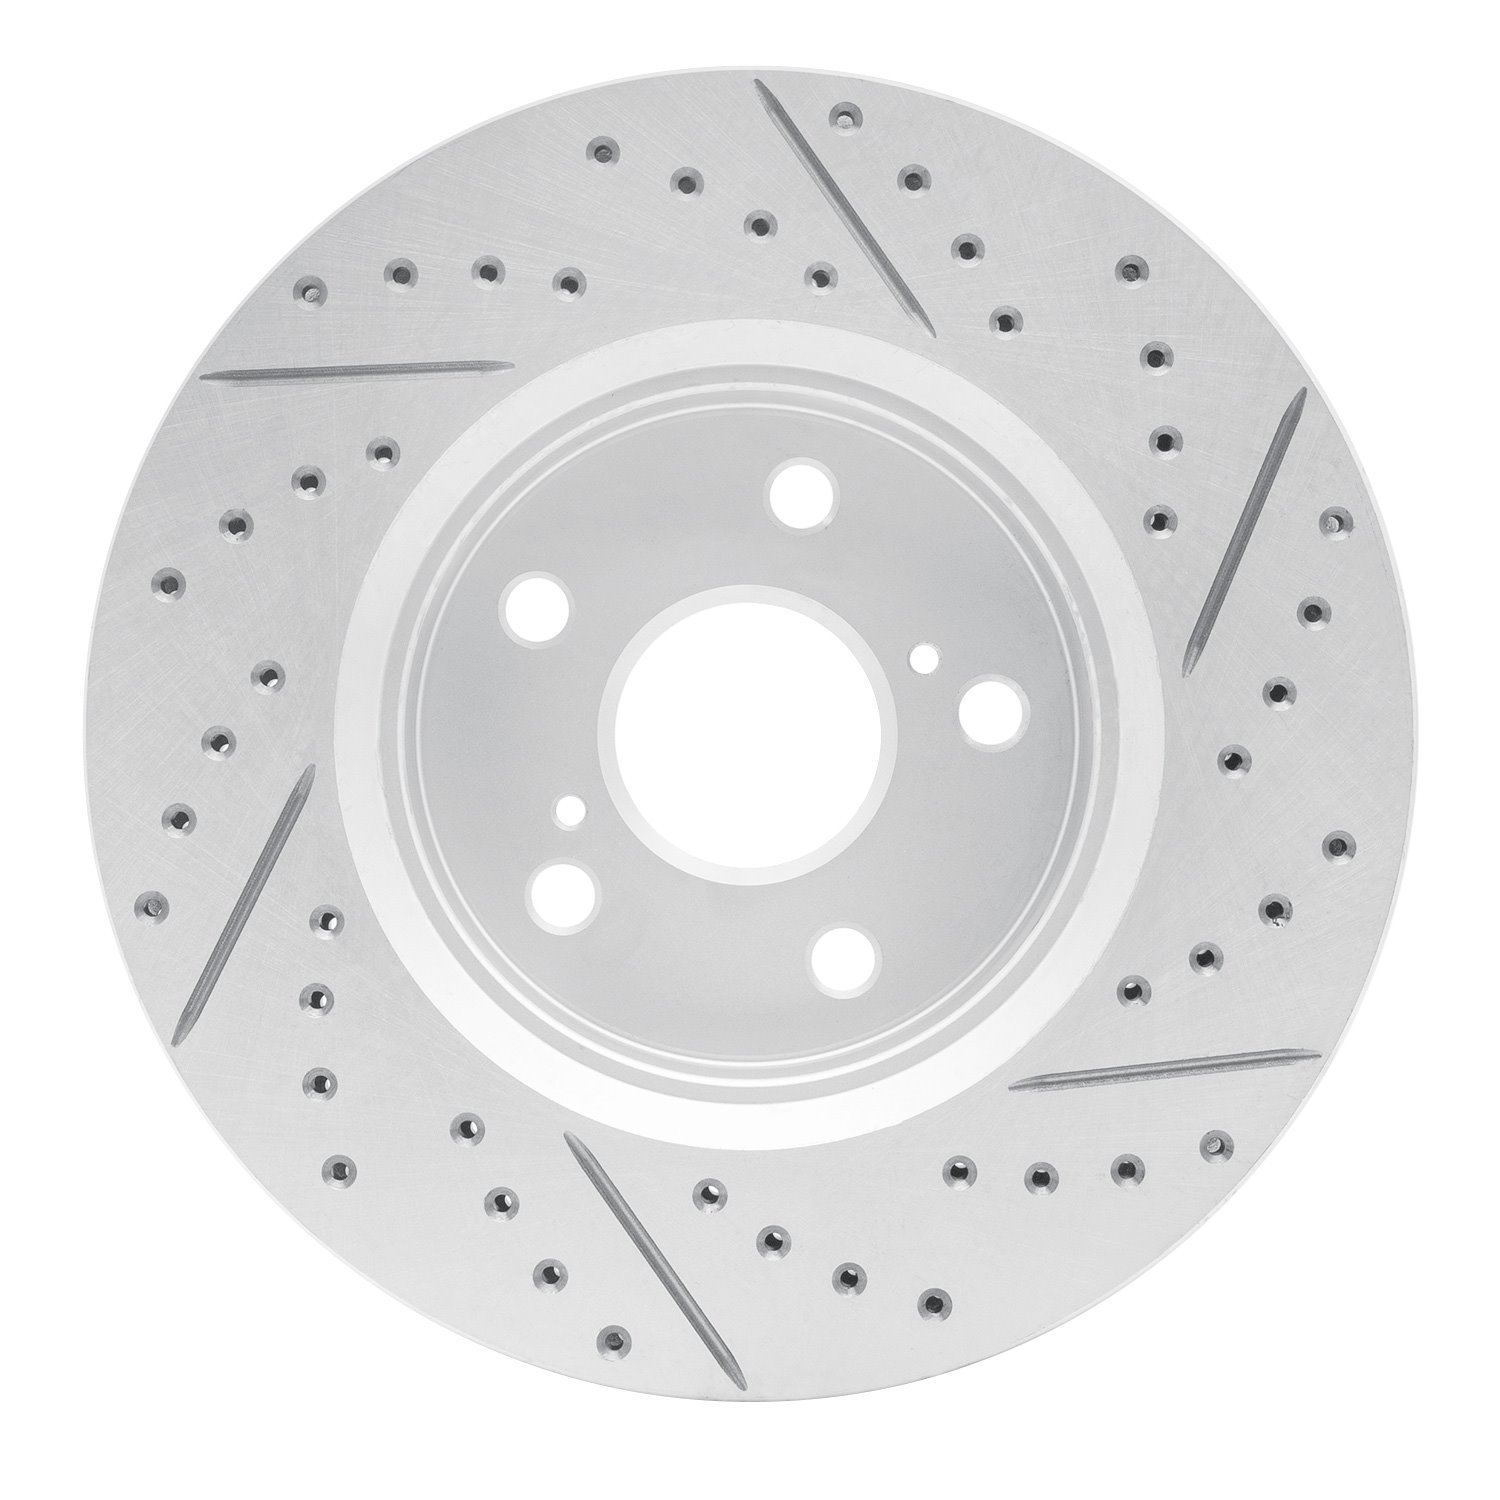 830-76153L Geoperformance Drilled/Slotted Brake Rotor, Fits Select Lexus/Toyota/Scion, Position: Front Left